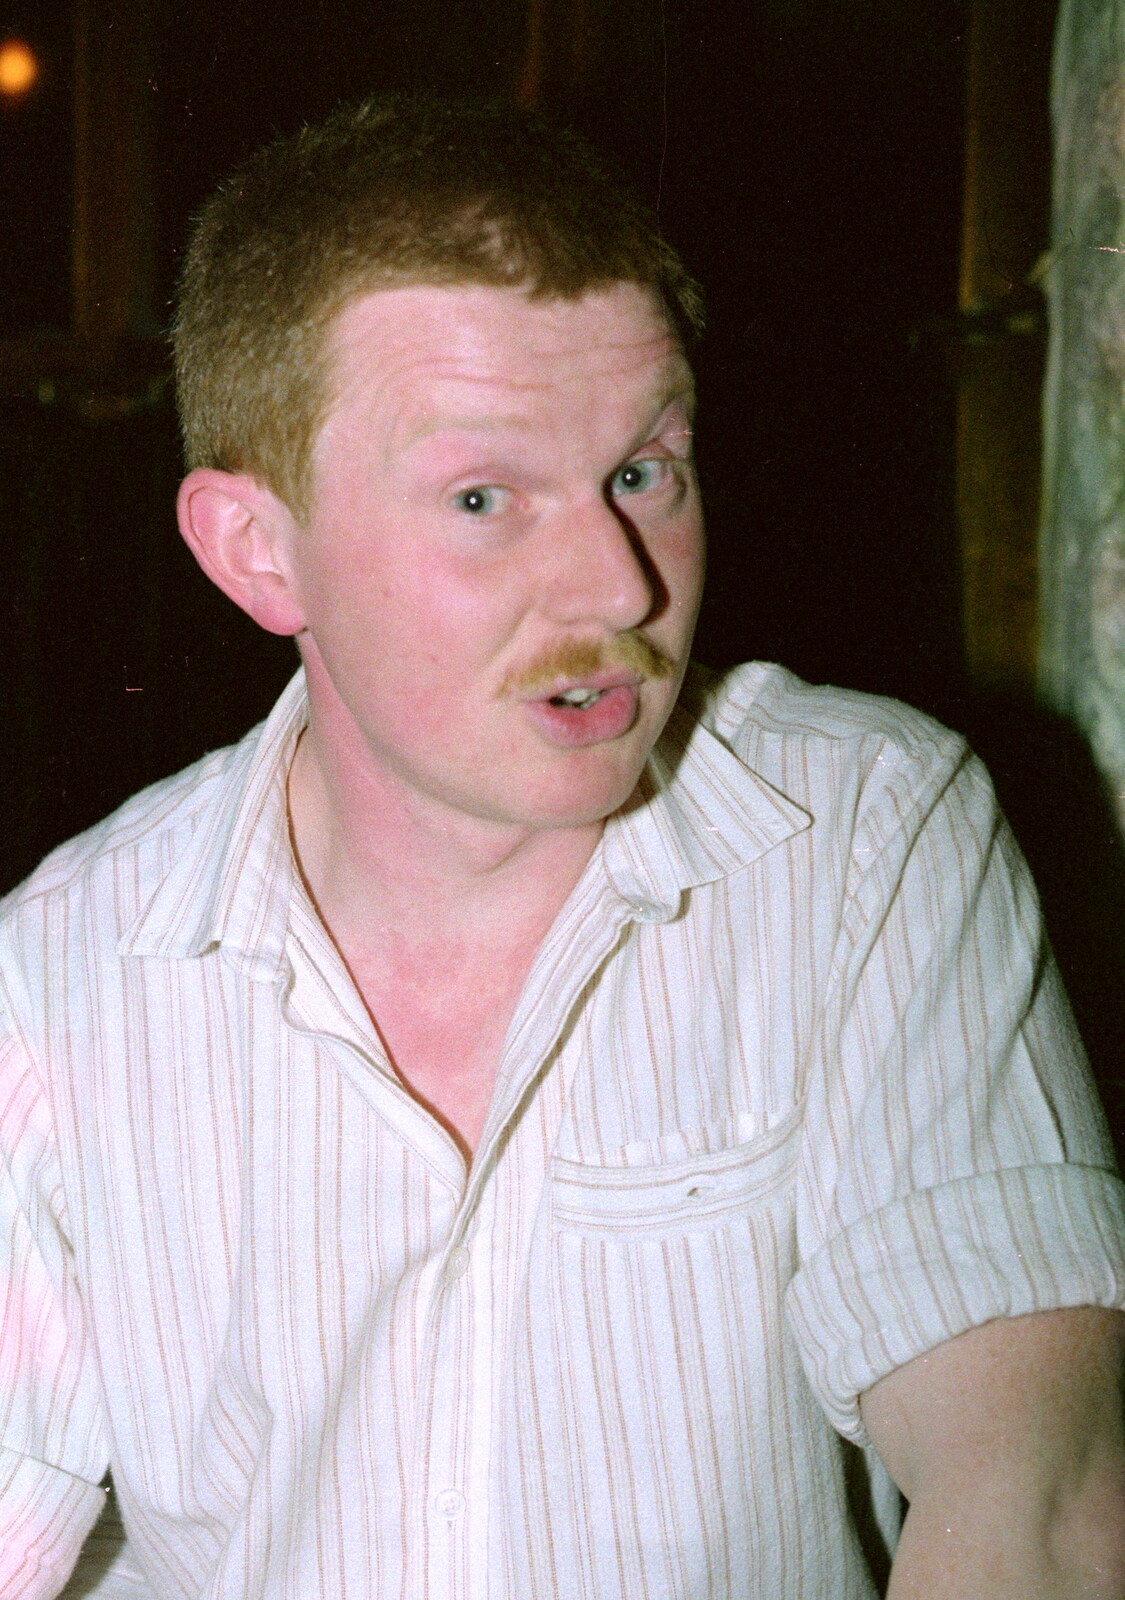 Mark, the REME squaddie from Uni: Night and Day on the Barbican, Plymouth, Devon - 1st May 1986